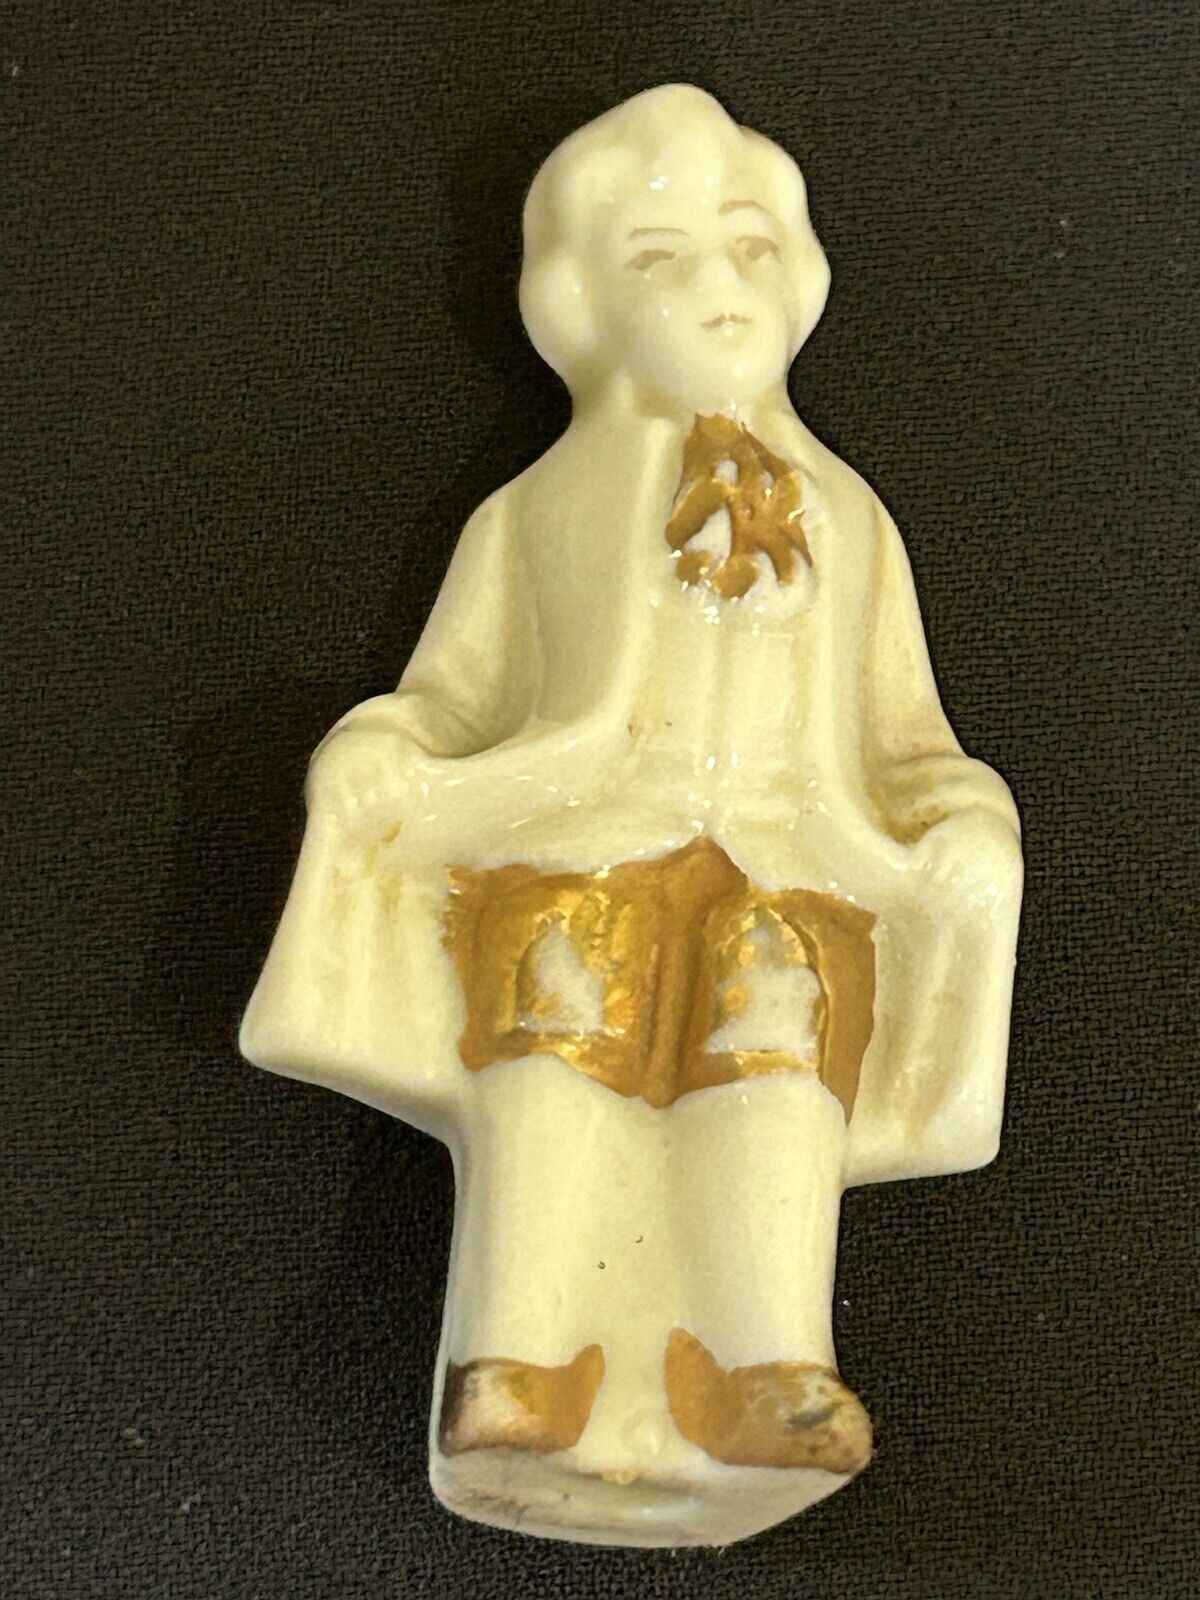 White Porcelain Gold Edged Miniature Victorian  Boy Antique Figurine Numbered